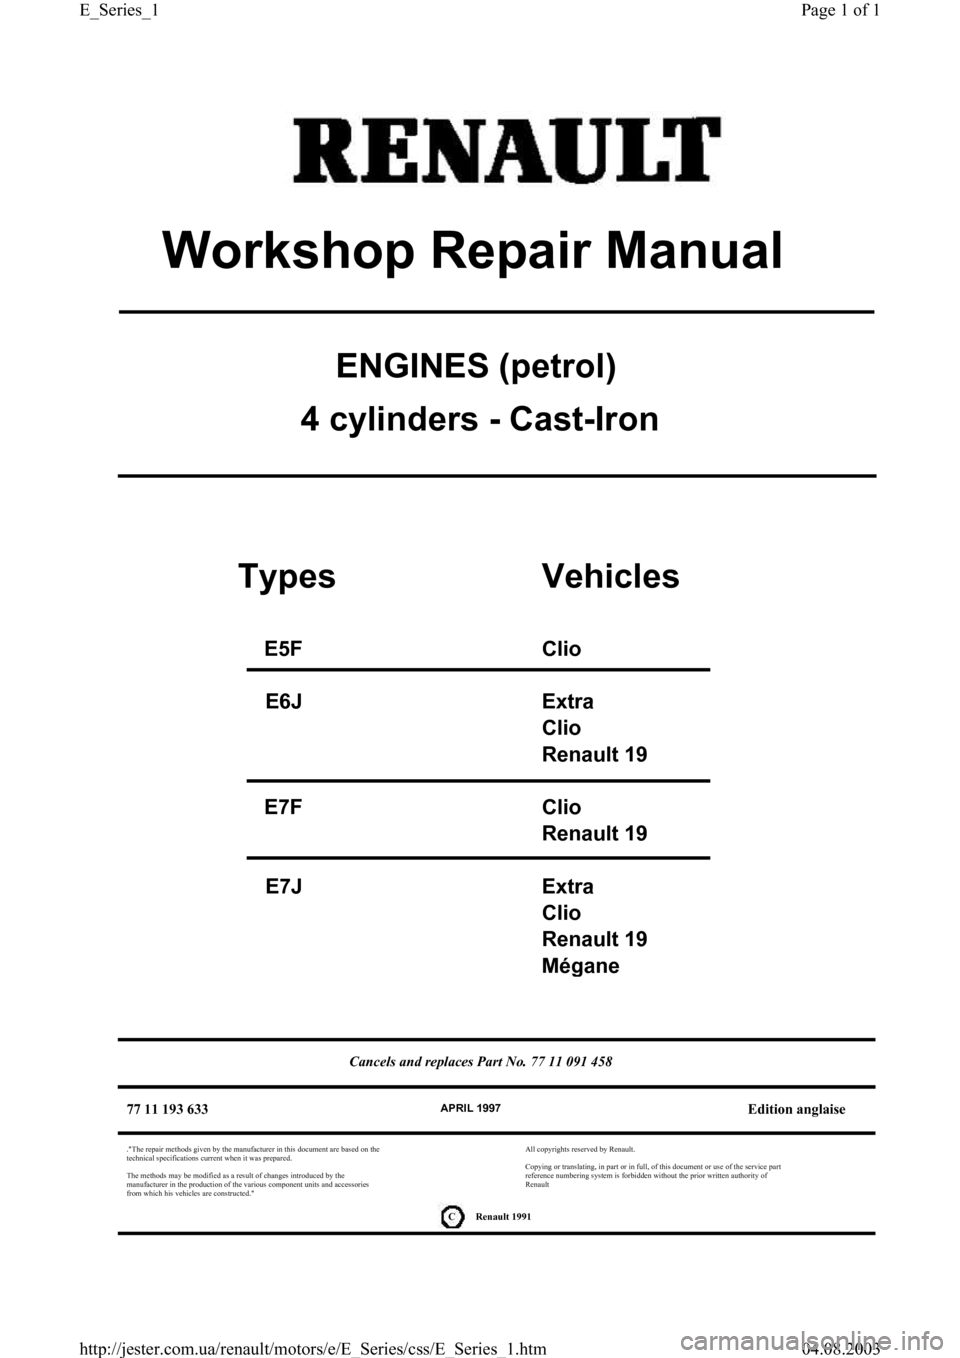 RENAULT CLIO 1997 X57 / 1.G Petrol Engines Workshop Manual Renault 1991
ENGINES (petrol)
4 cylinders - Cast-Iron
Types Vehicles
E5F Clio
E6J Extra
Clio
Renault 19
E7F Clio
Renault 19
E7J Extra
Clio
Renault 19
Mé
gane
77 11 193 633APRIL 1997Edition anglaise
.